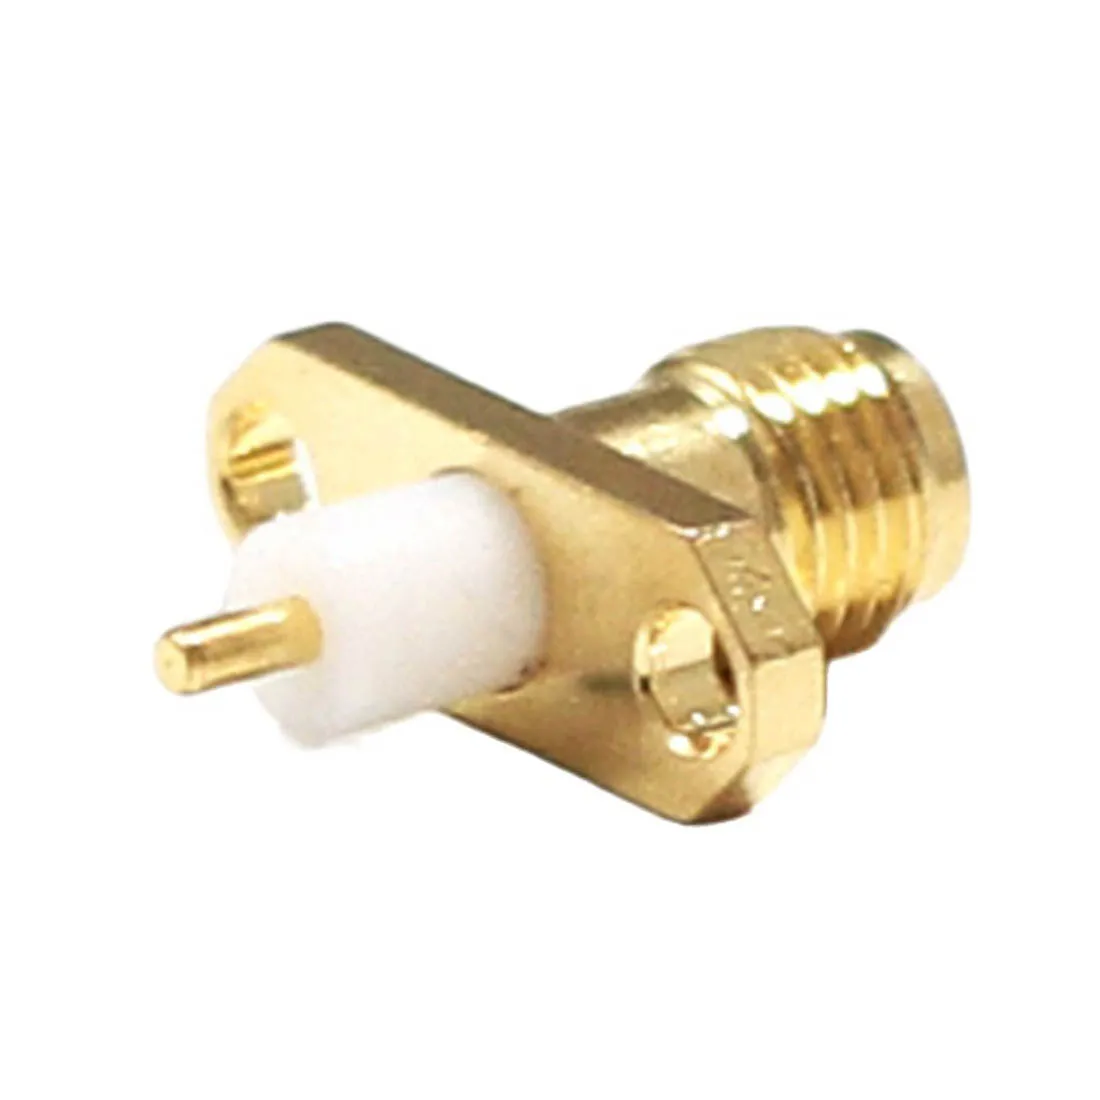 1pc NEW  SMA Female Jack RF Coax Modem Convertor Connector Panel Mount Solder Post Straight Insulator Long 4mm Goldplated 1pc sma connector female jack right angle rf coax convertor pcb mount convertor goldplated new wholesale